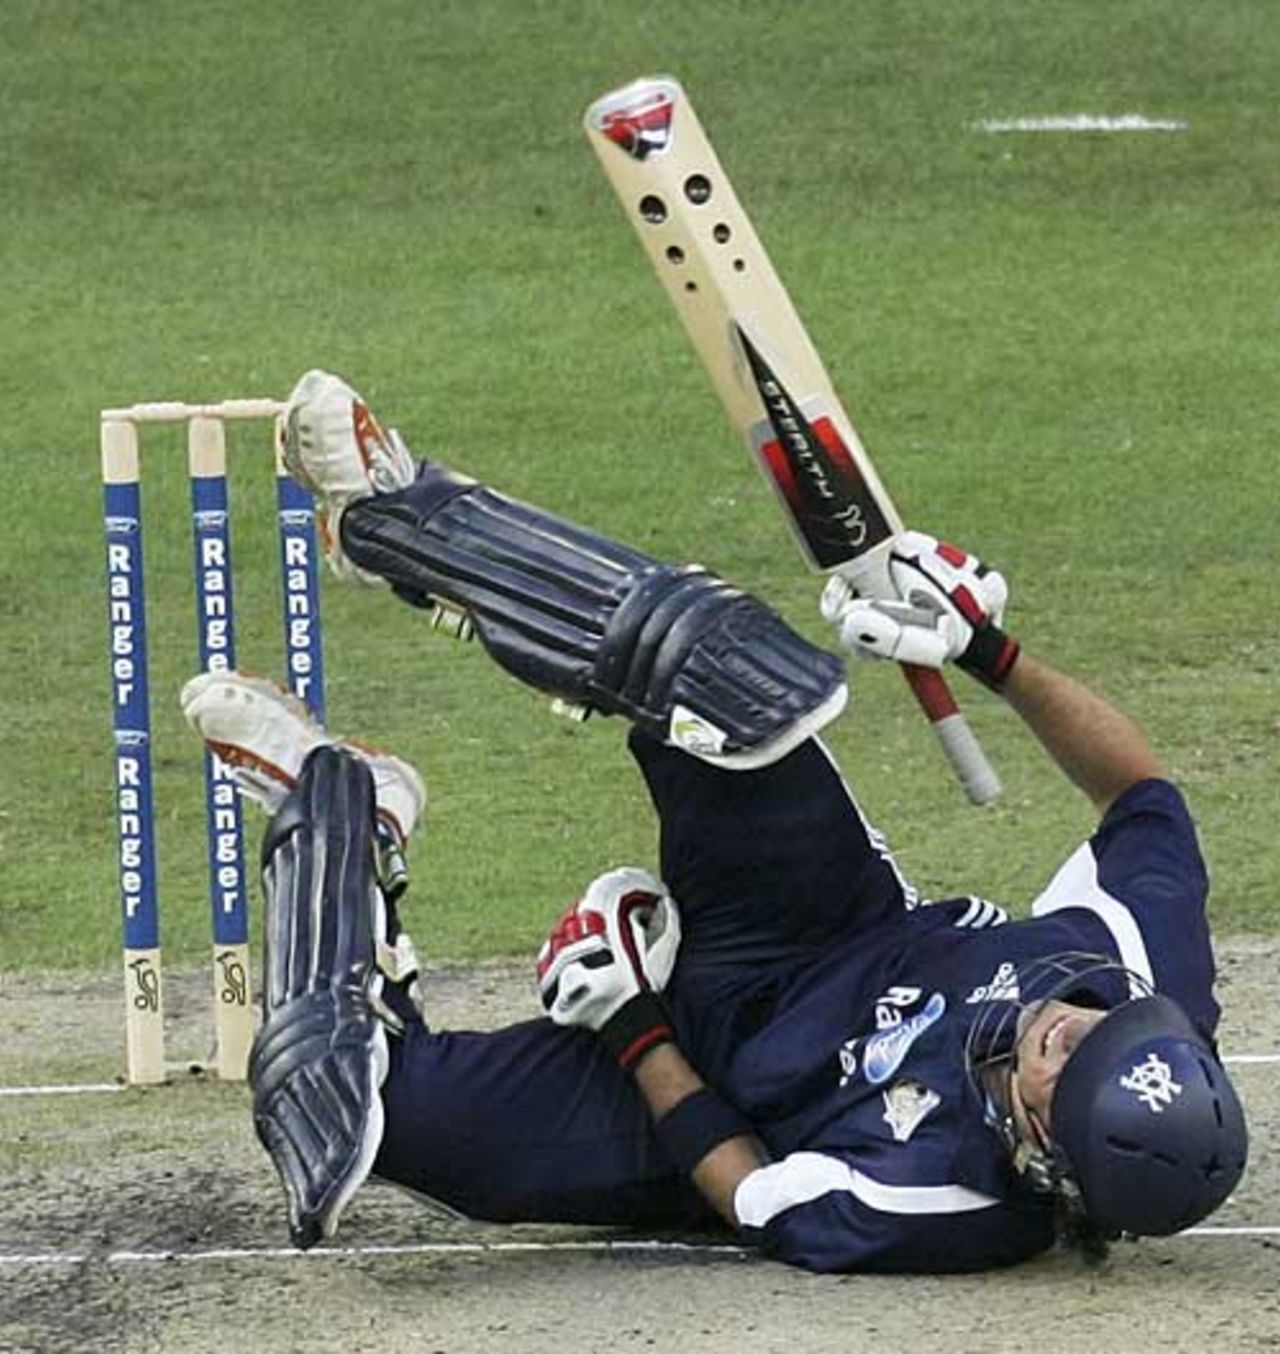 Jon Moss is felled during his innings, Victoria v Queensland, Ford Ranger Cup final, Melbourne, February 25, 2007